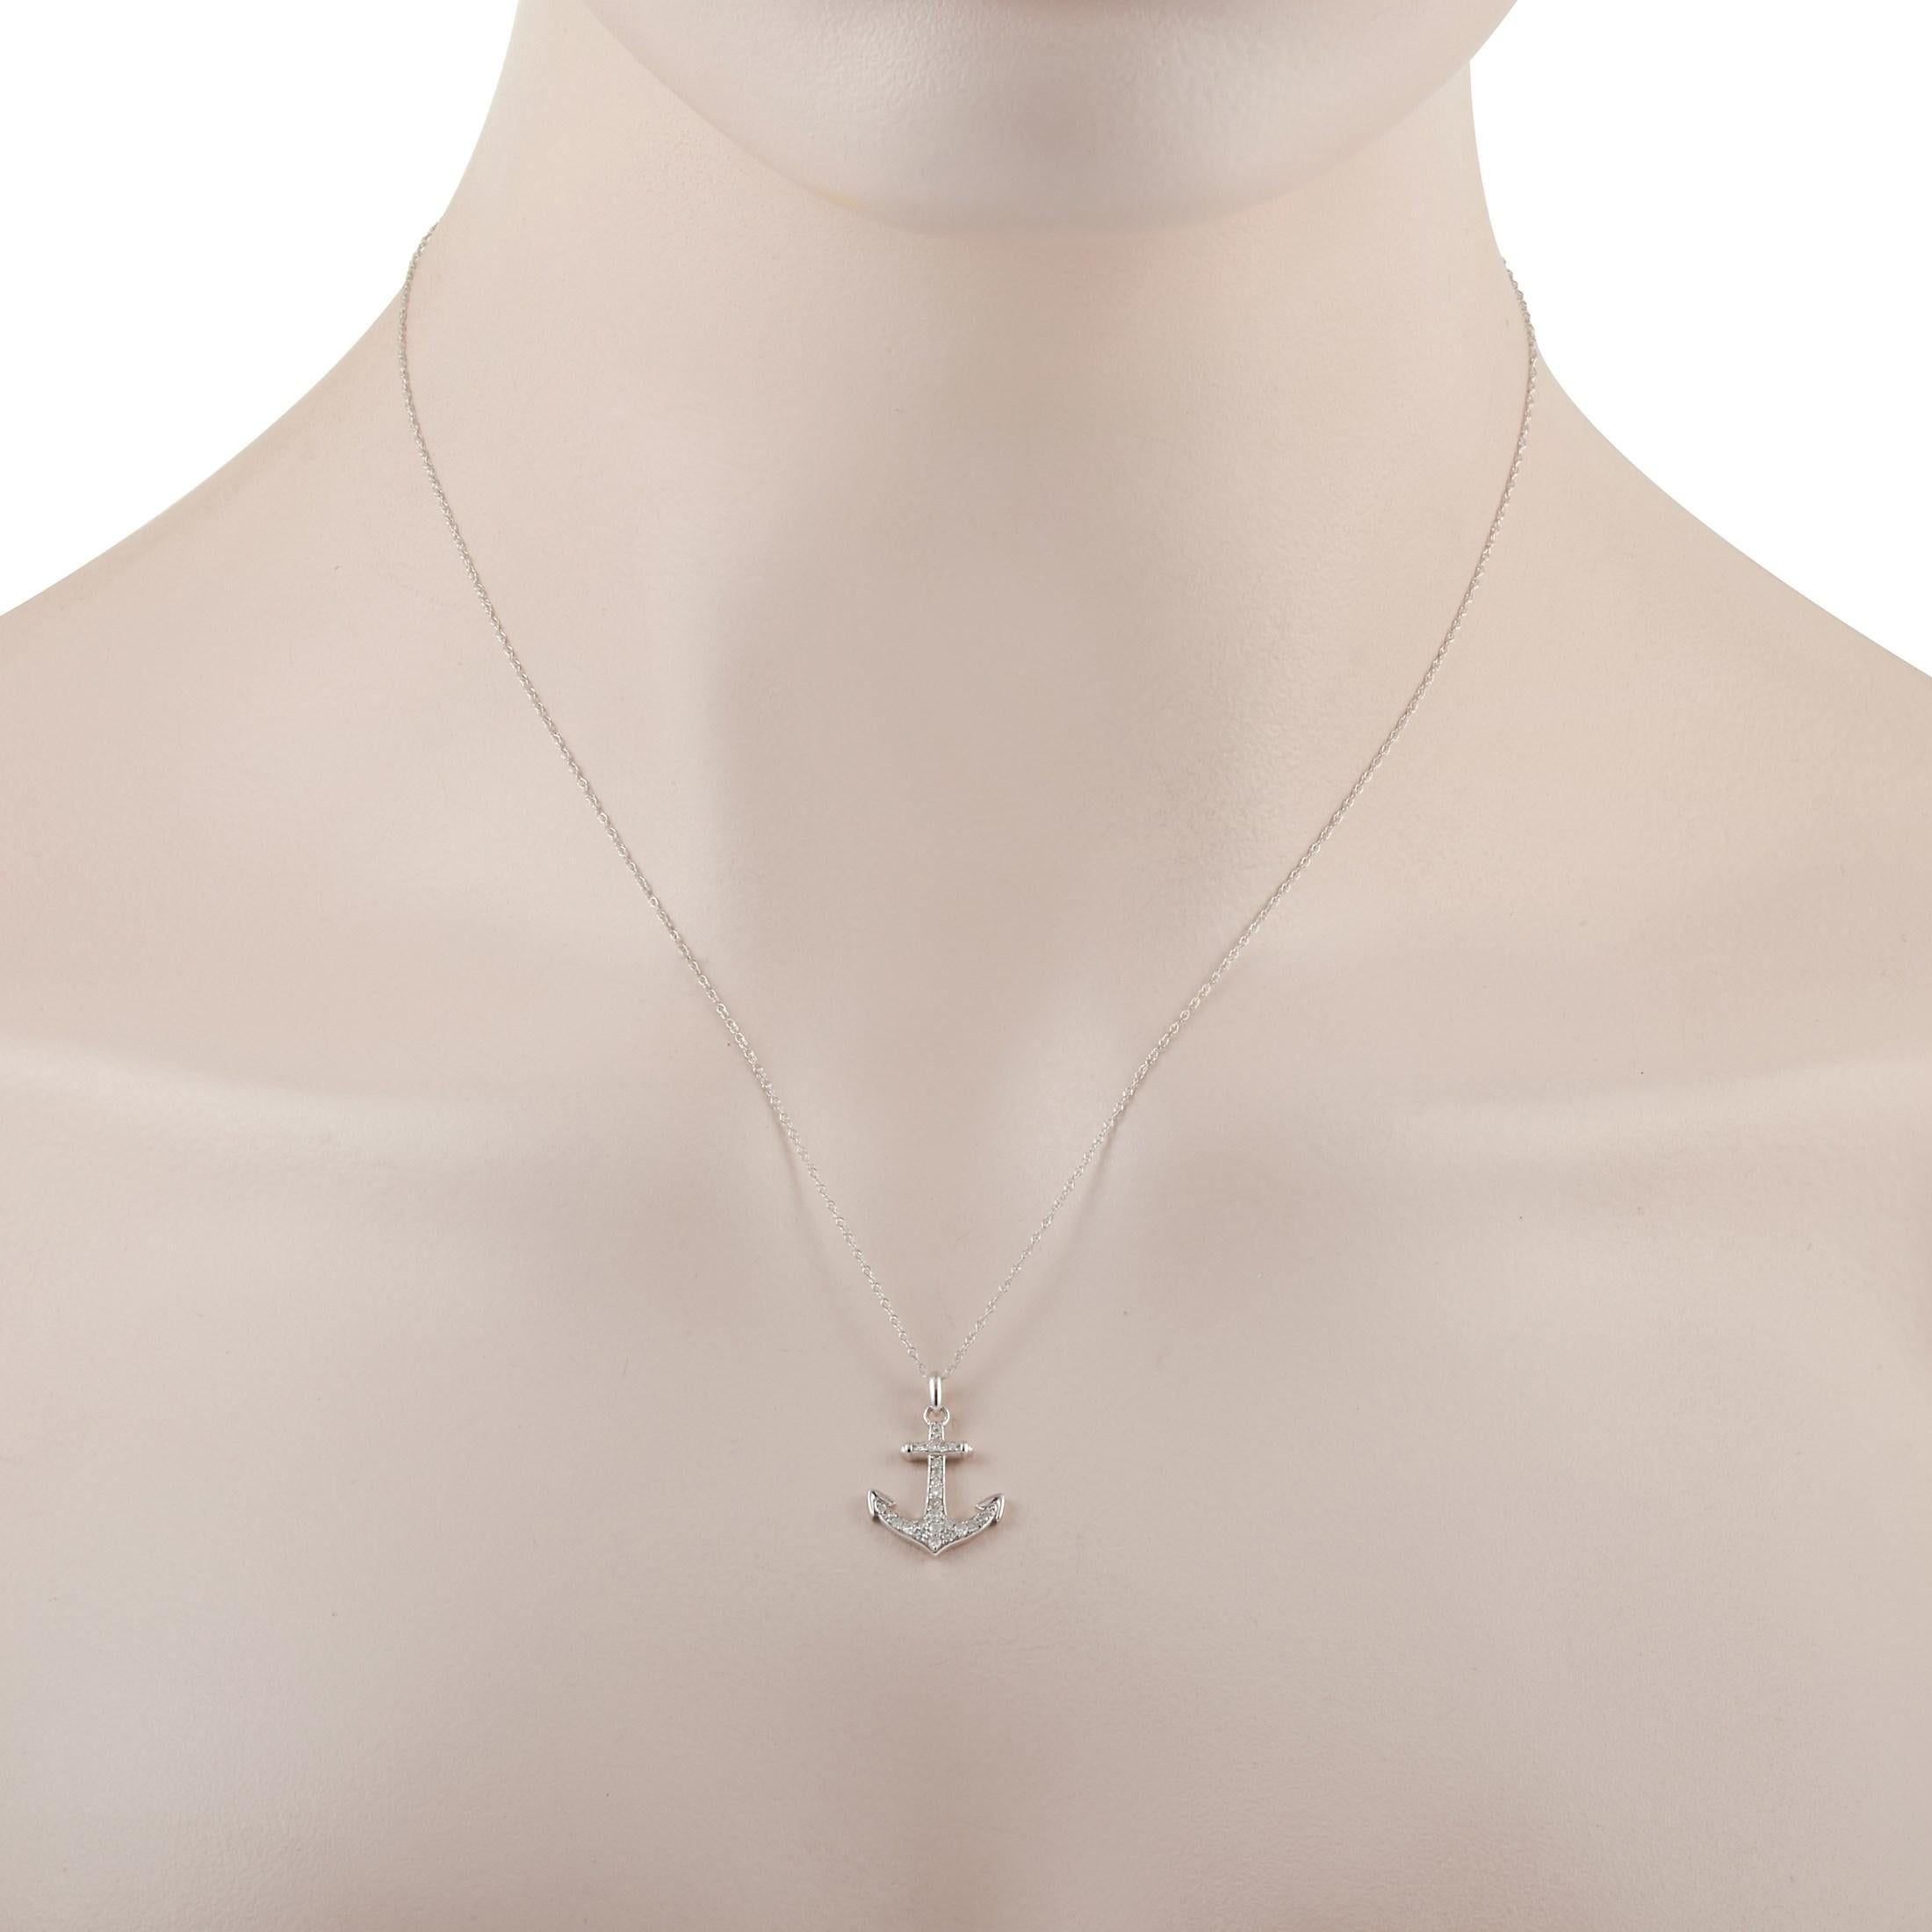 The LB Exclusive 14K White Gold 0.17 ct Diamond Anchor Necklace makes for a beautiful gift for someone you always feel safe with. This jewel is fashioned in versatile white gold so it's easy to wear. The pendant measures 0.75-inch by 0.5-inch which